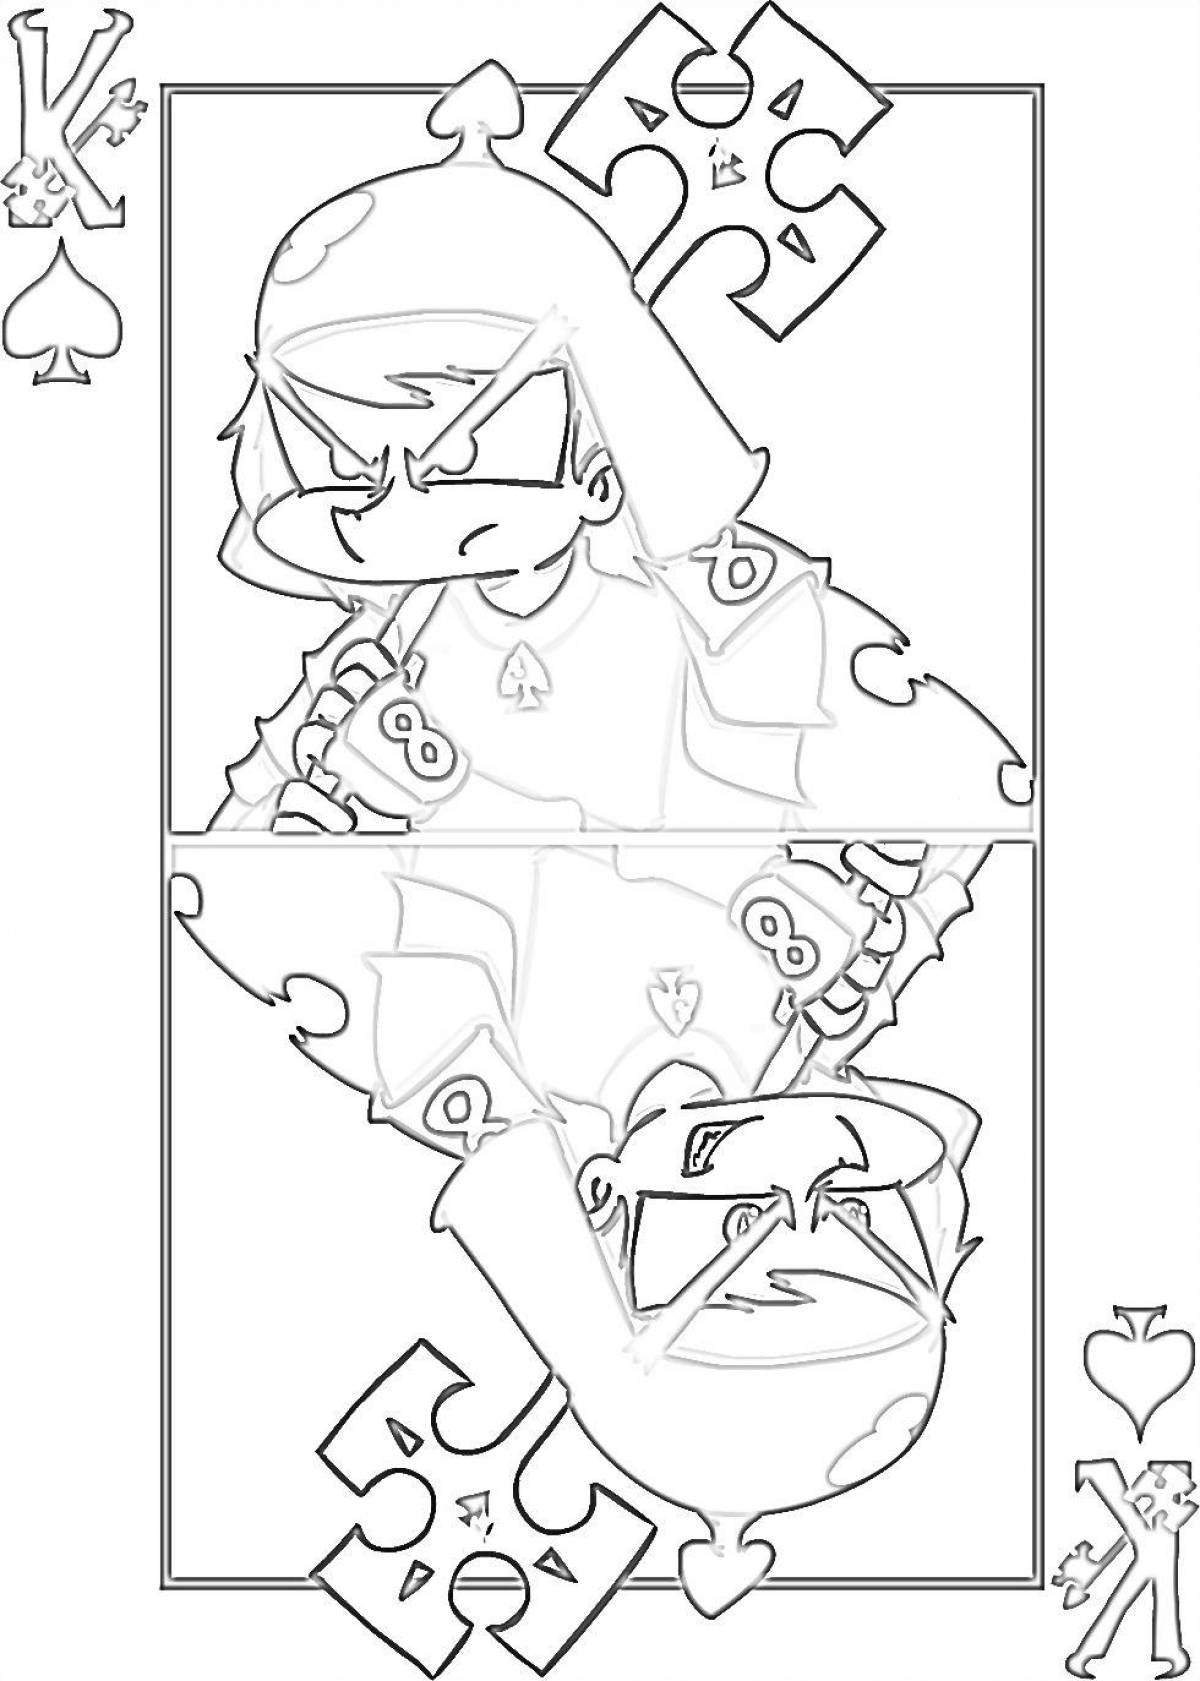 Sparkly coloring 13 cards of spades